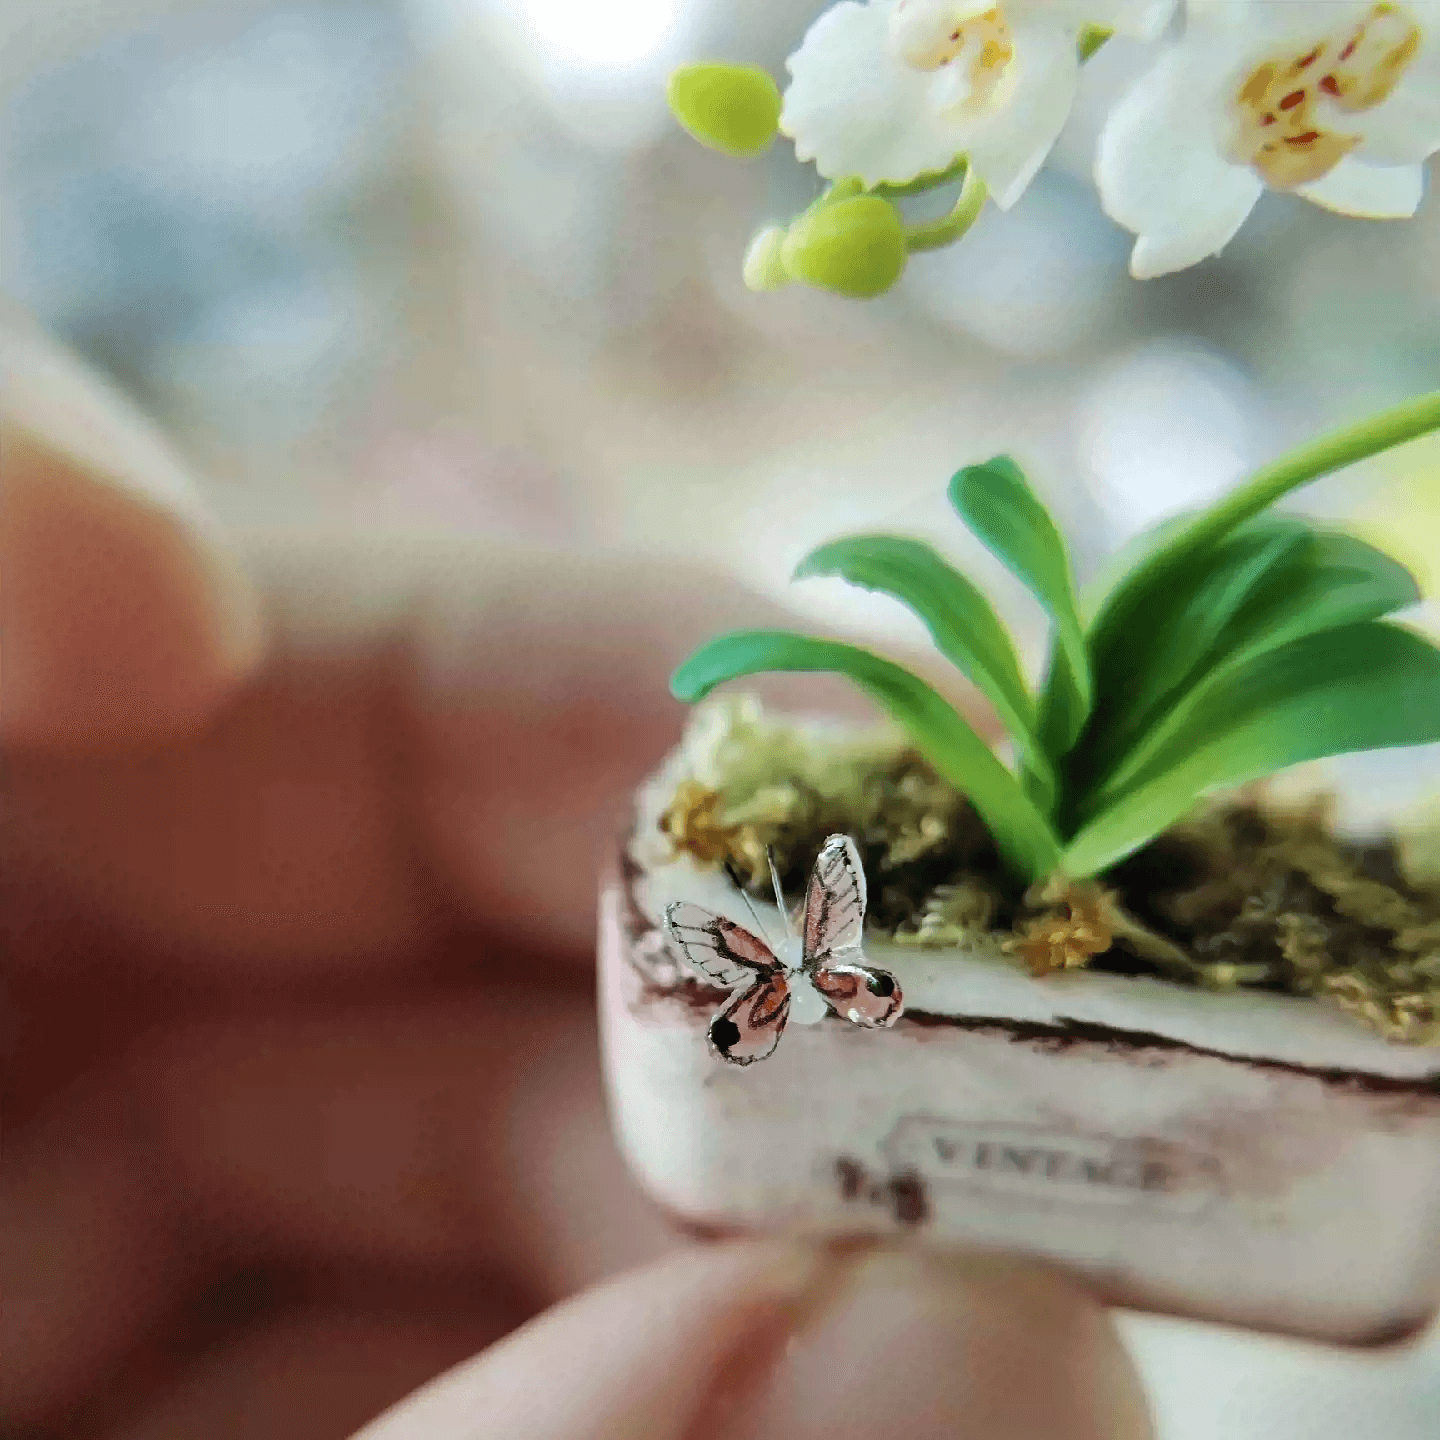 Phalaenopsis Moth Orchids are thick-leaved plants with elegant, arching sprays of bloom- the orchids are perfect for your coffee table or work desk.  Material: Handmade from Clay